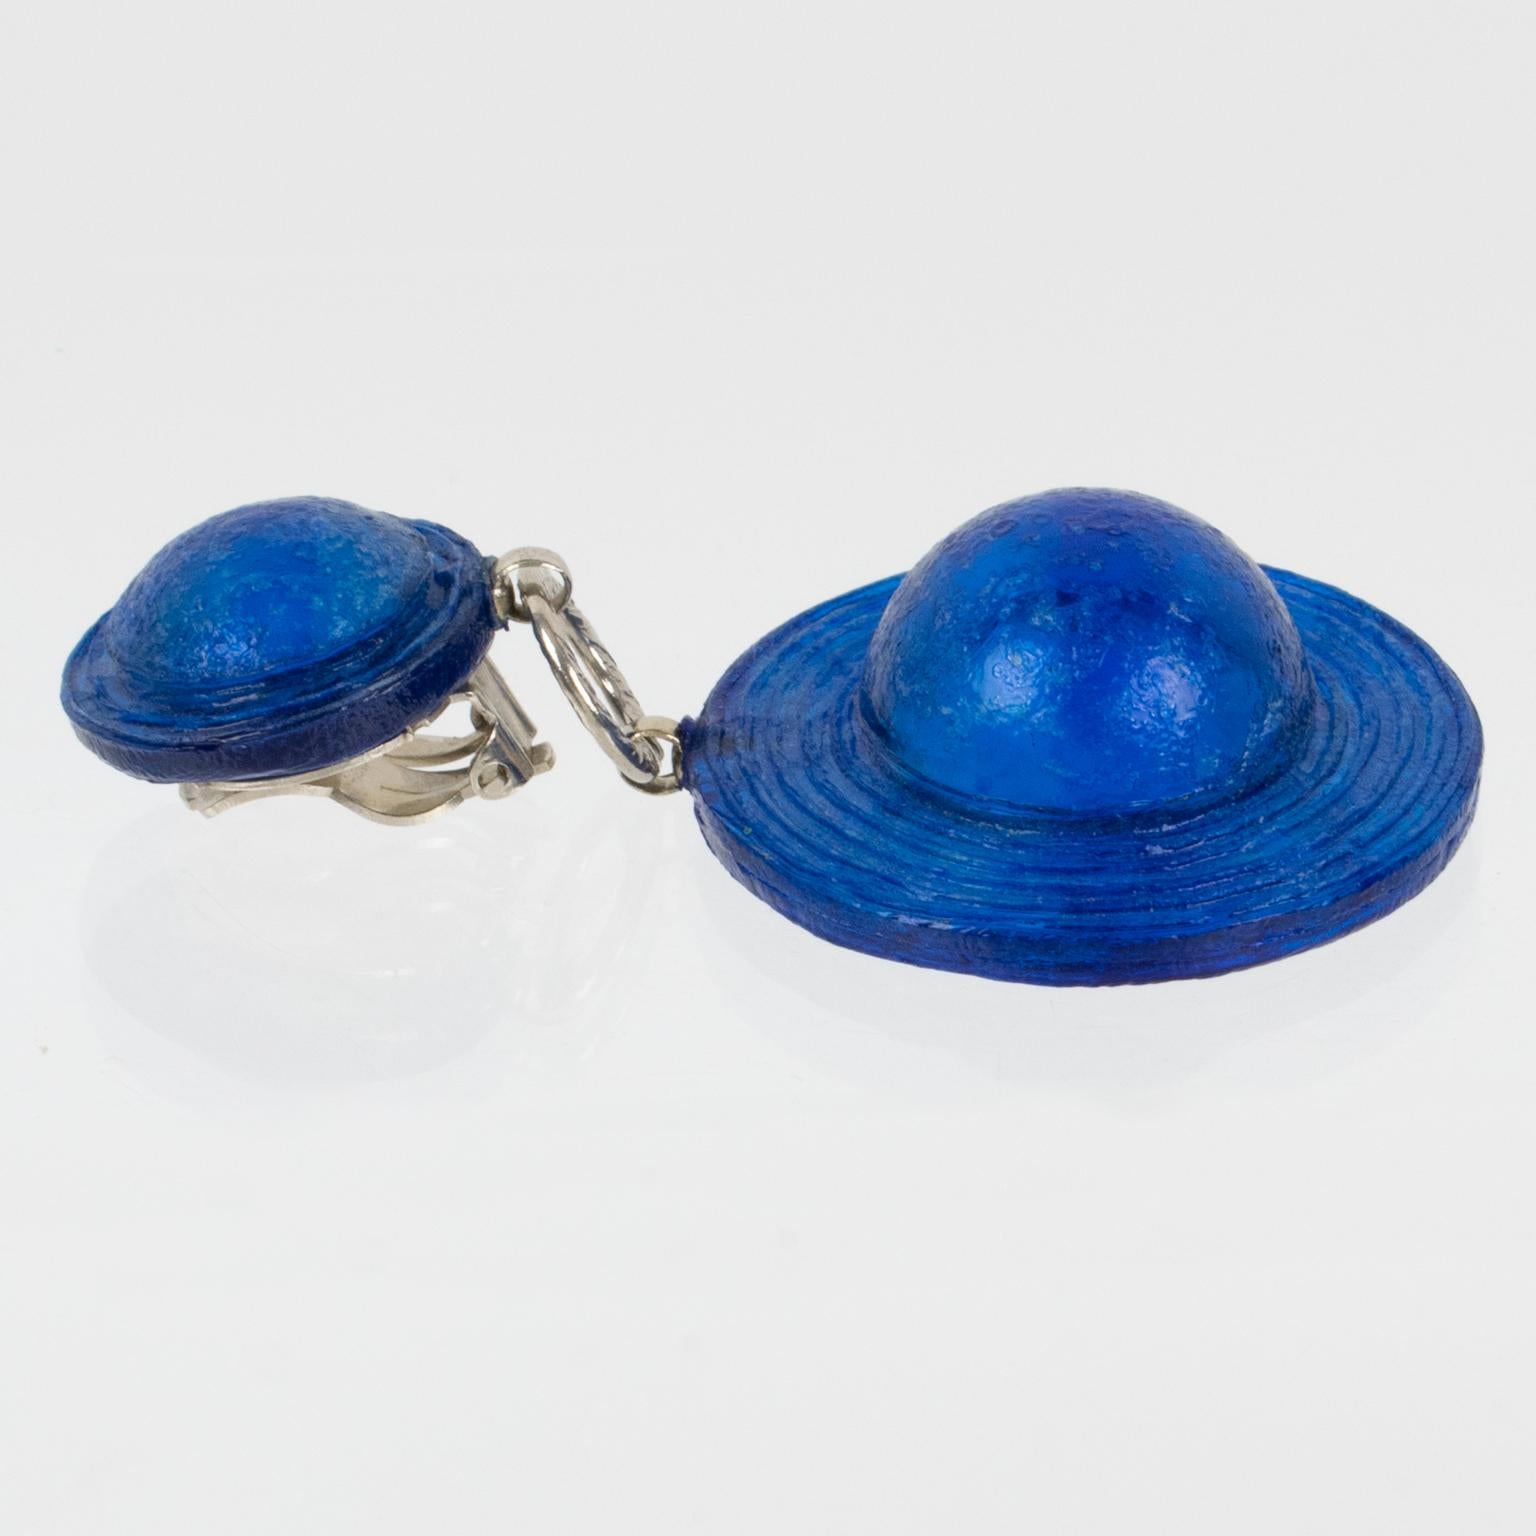 Francoise Montague by Cilea Resin Clip Earrings Dangle Cobalt Blue Hat In Excellent Condition For Sale In Atlanta, GA